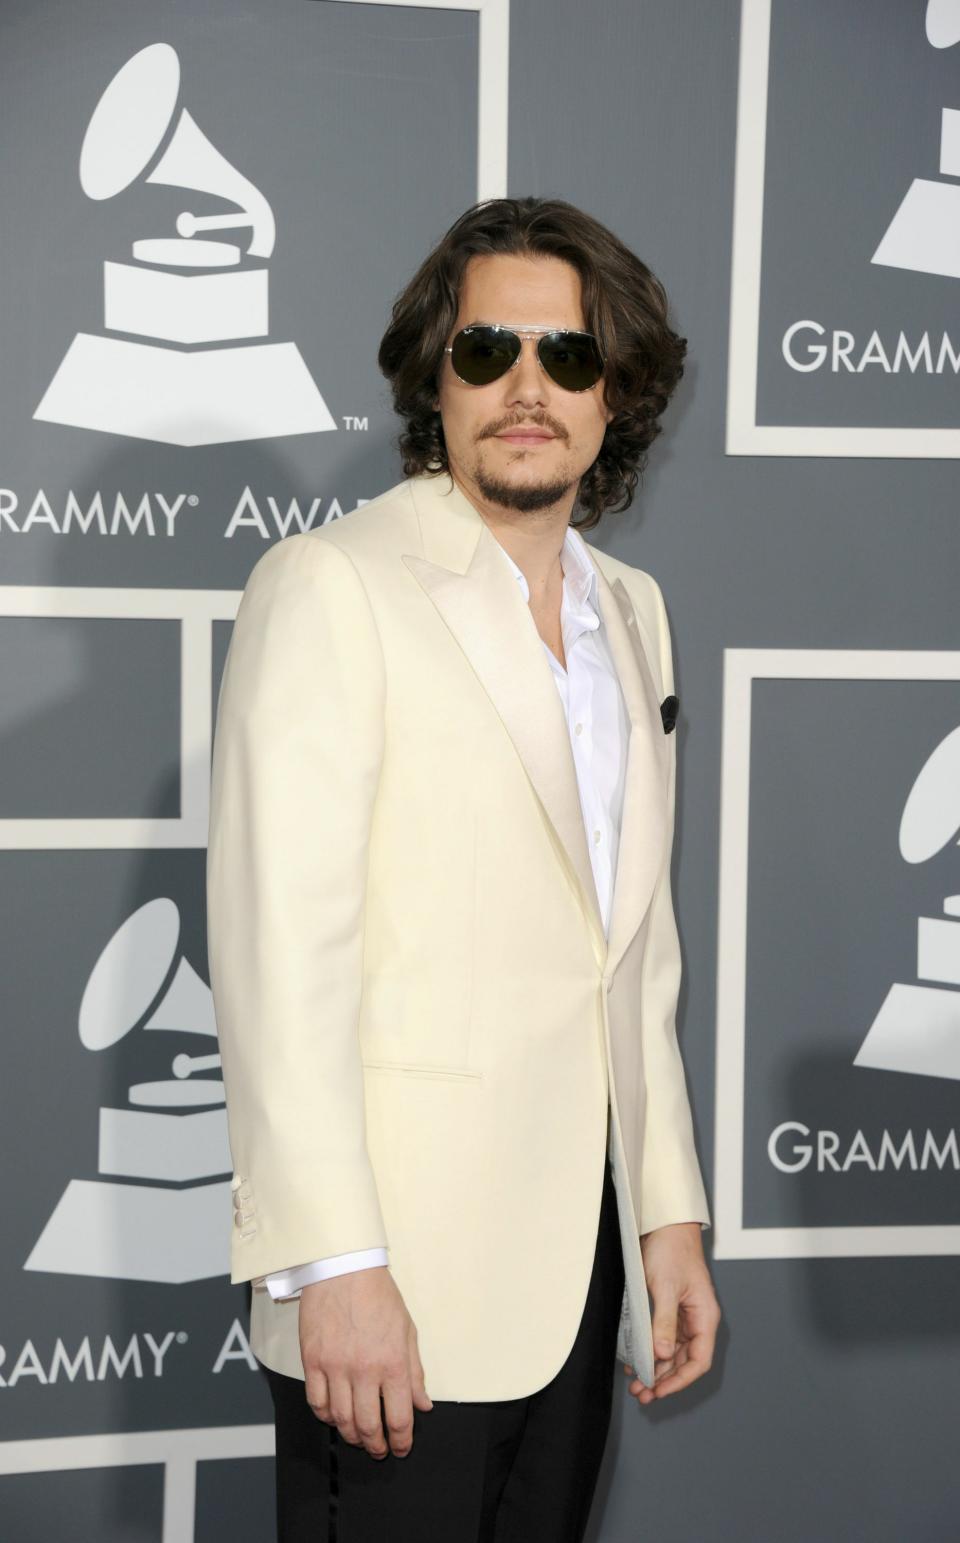 The 53rd Annual GRAMMY Awards - Arrivals